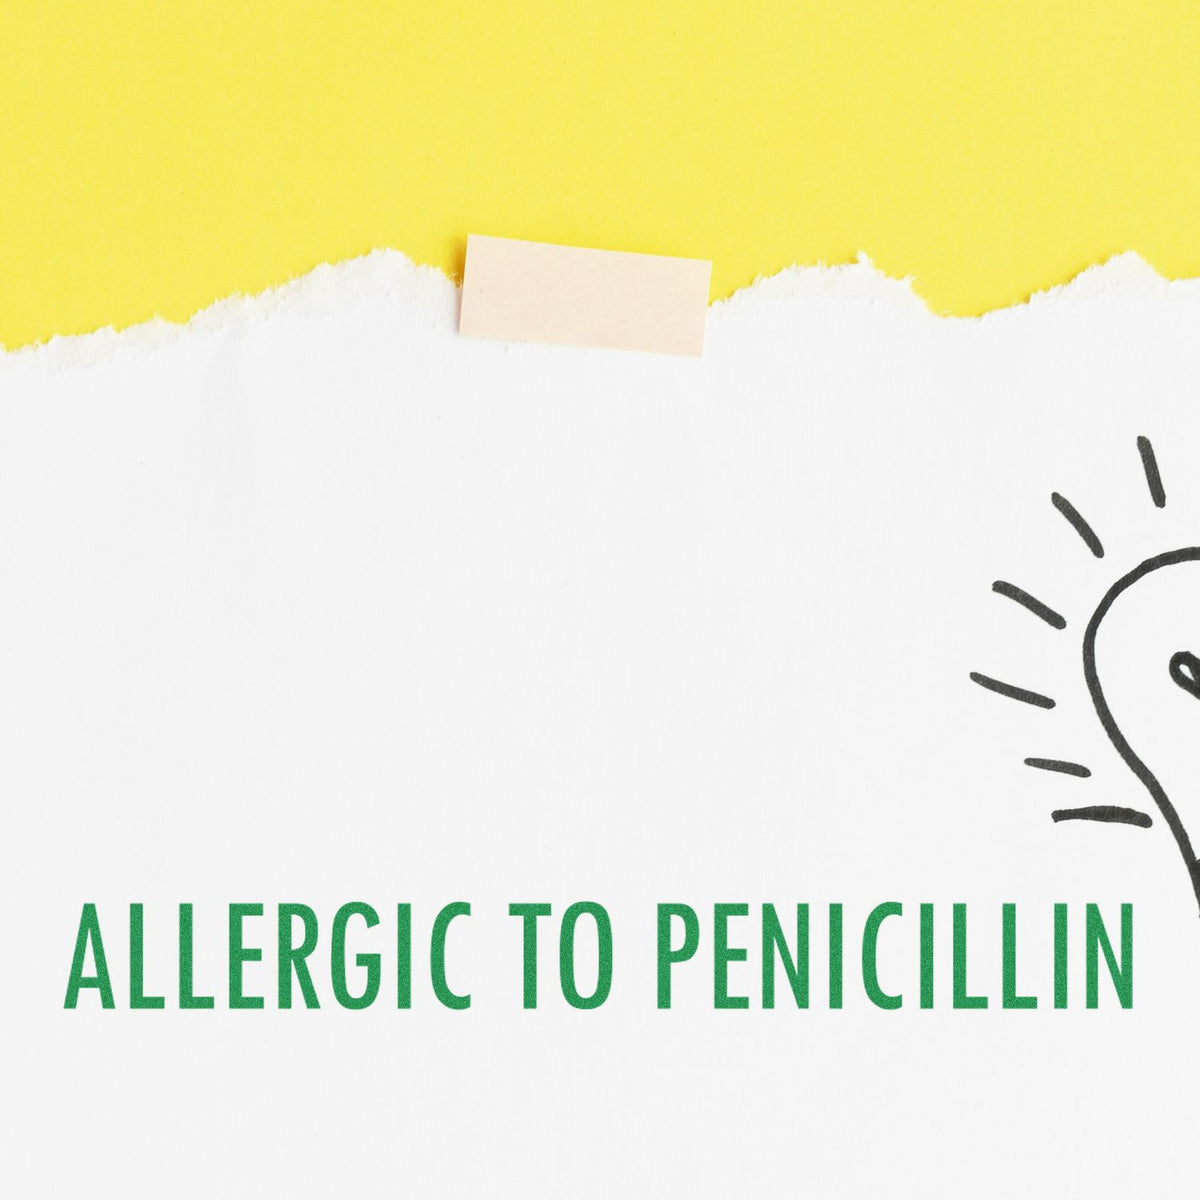 Large Allergic To Penicillin Rubber Stamp In Use